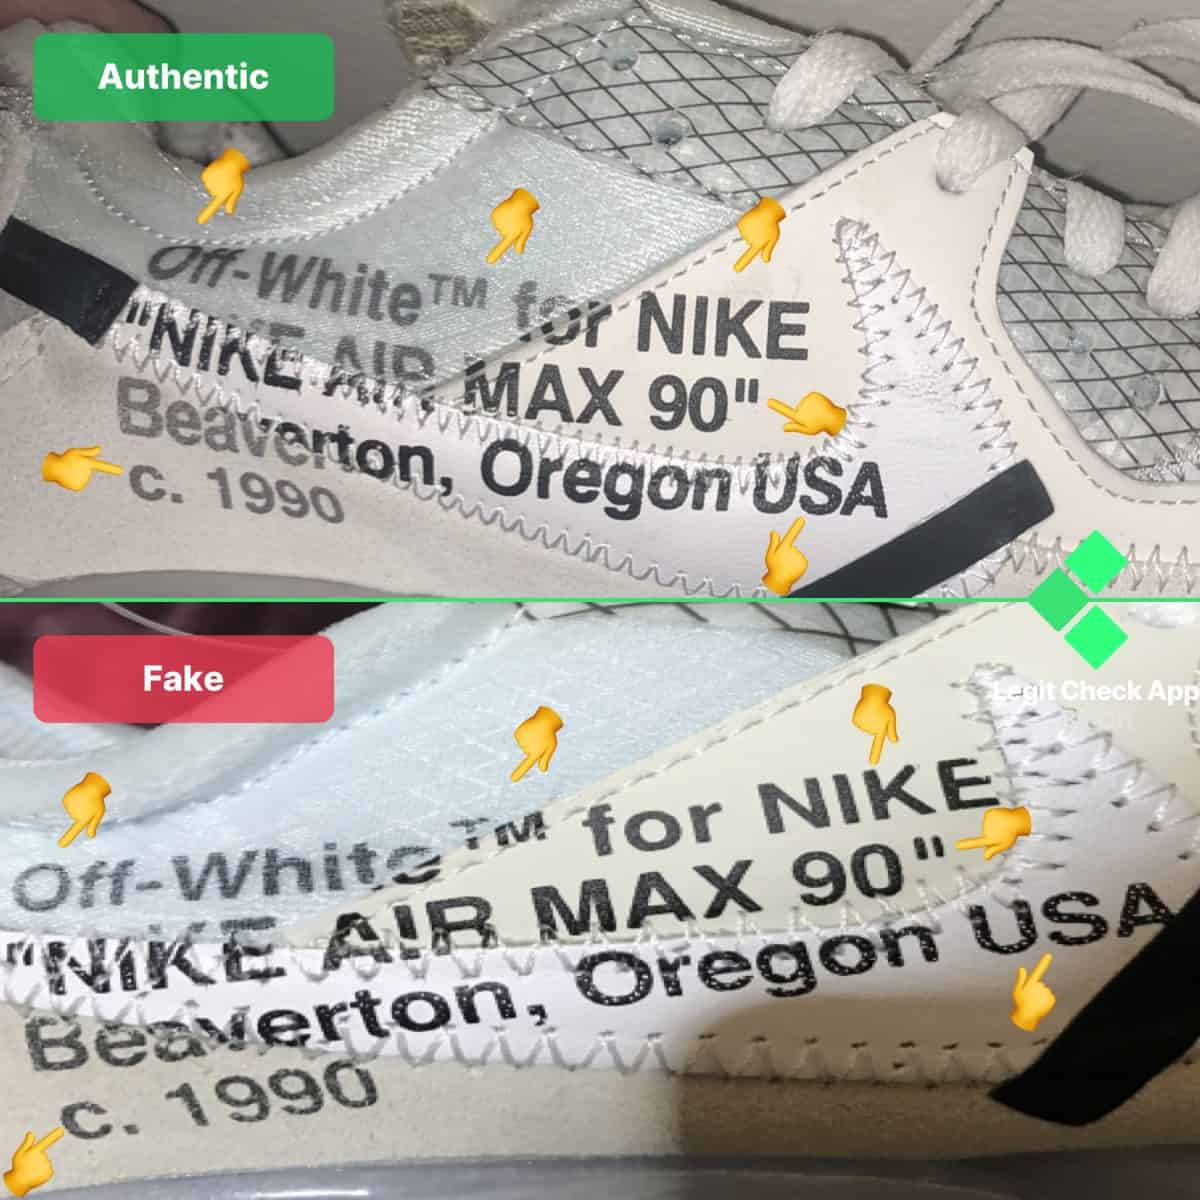 how to spot fake off-white air max 90